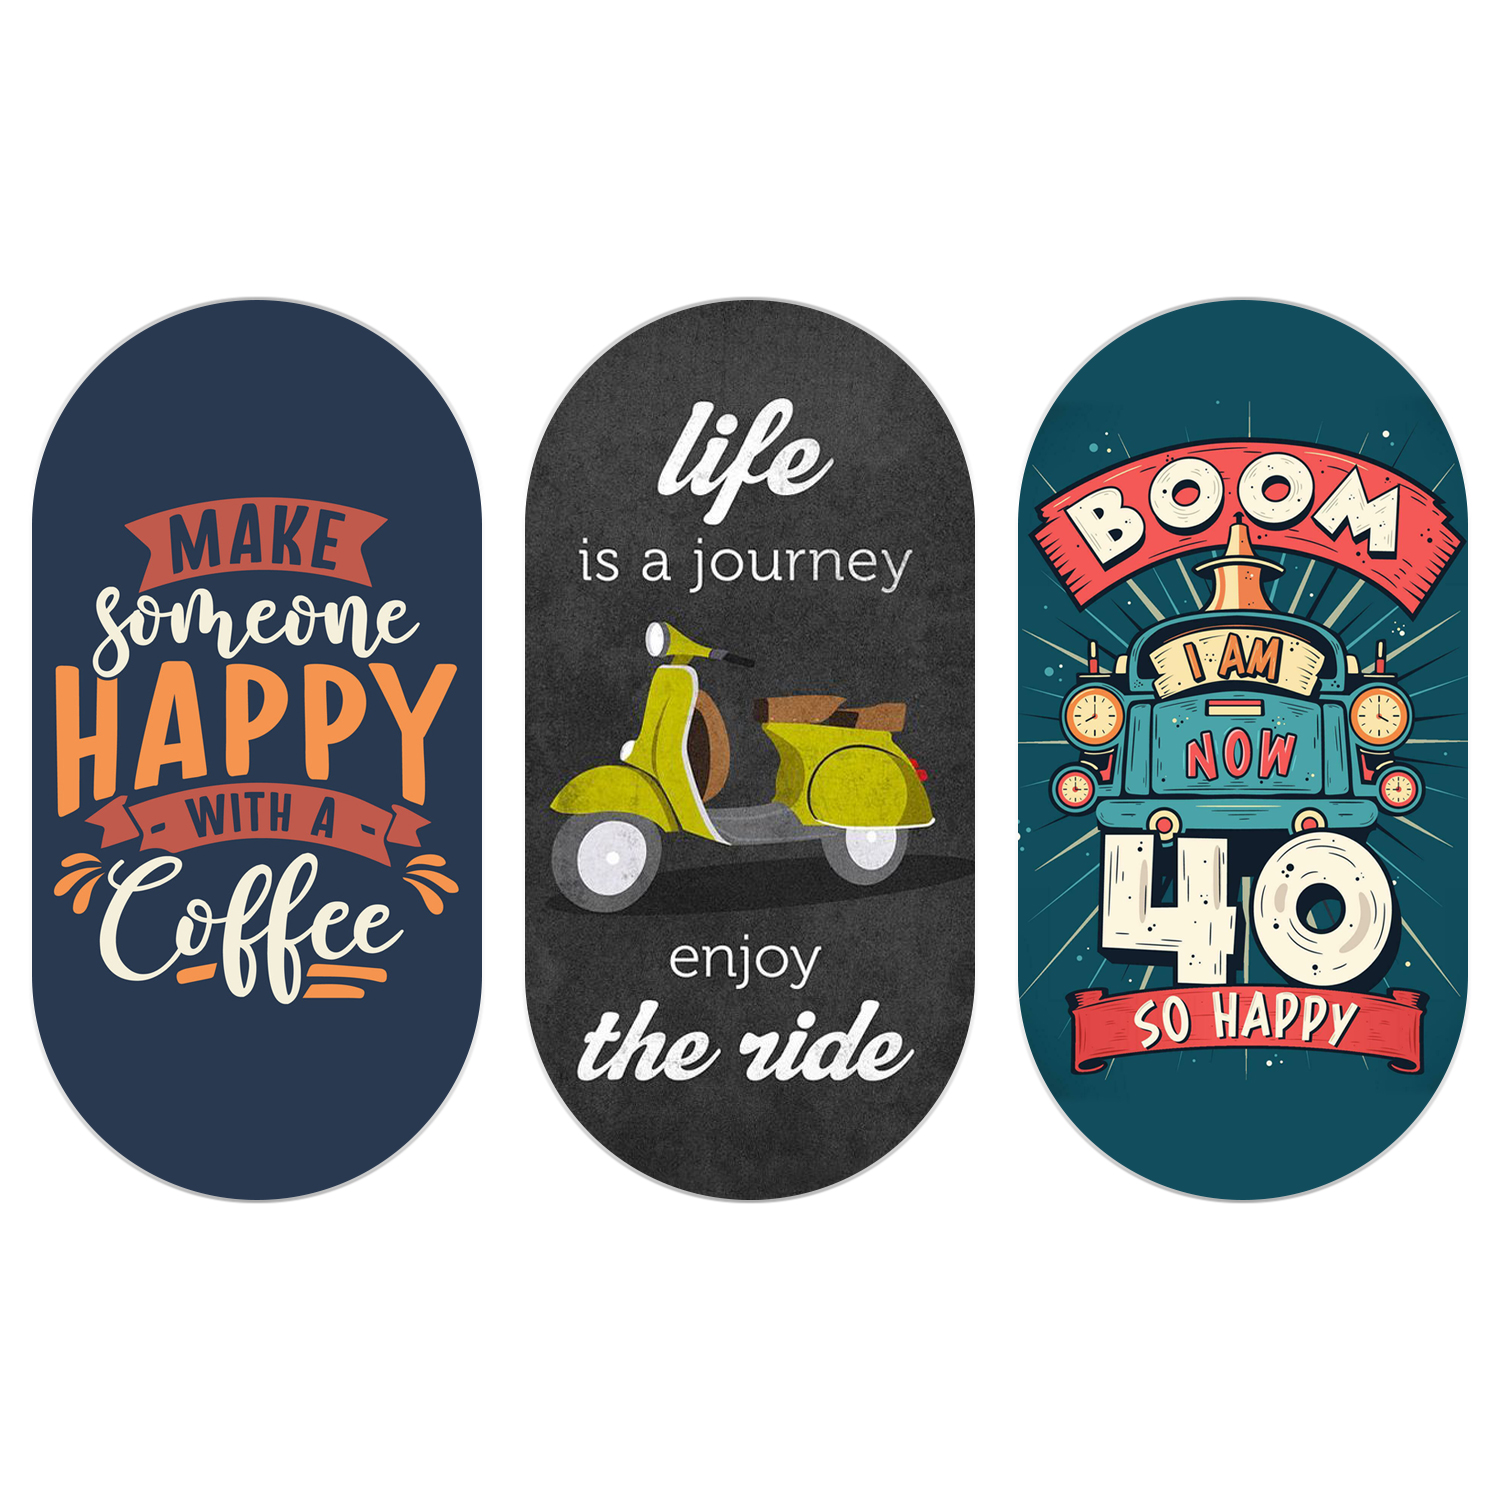 Life is a journey wooden plank set of 3 decor